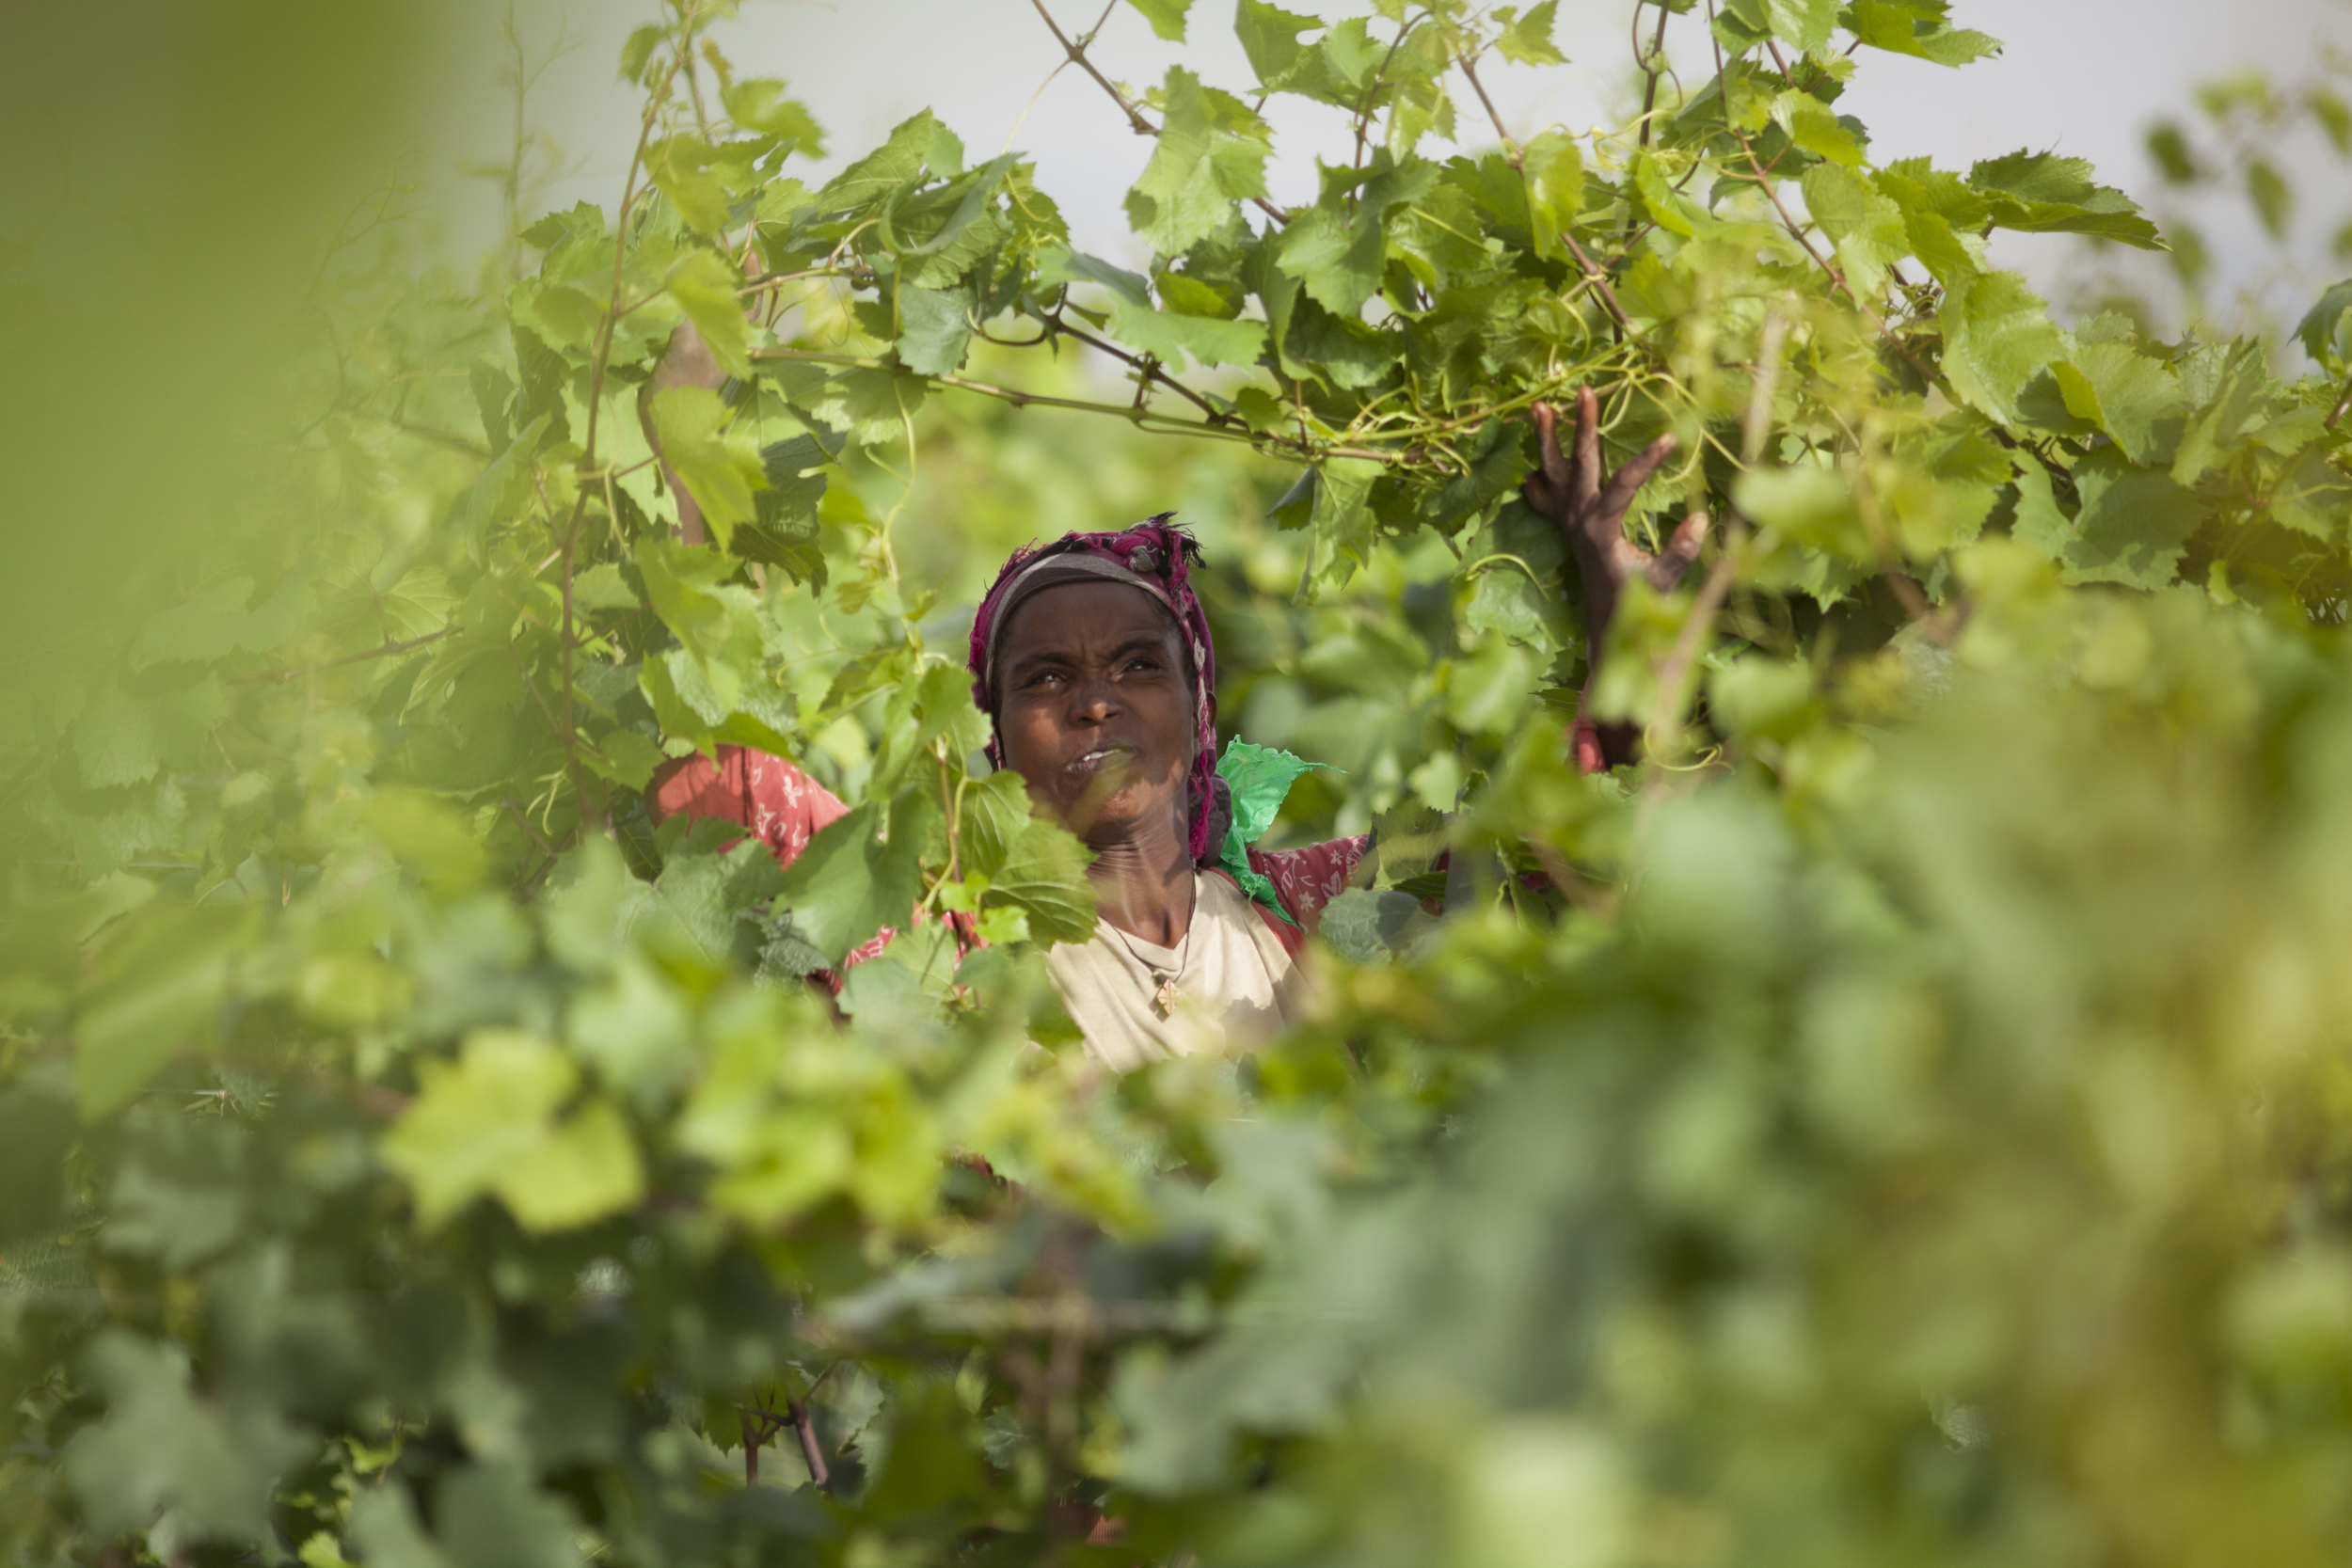  Workers are pictured pruning grape vines in the fields of Castel winery outside the town of Ziway, Ethiopia. Castel Wine has started production of wine in Ethiopia for the past three years. AFP PHOTO / ZACHARIAS ABUBEKER 